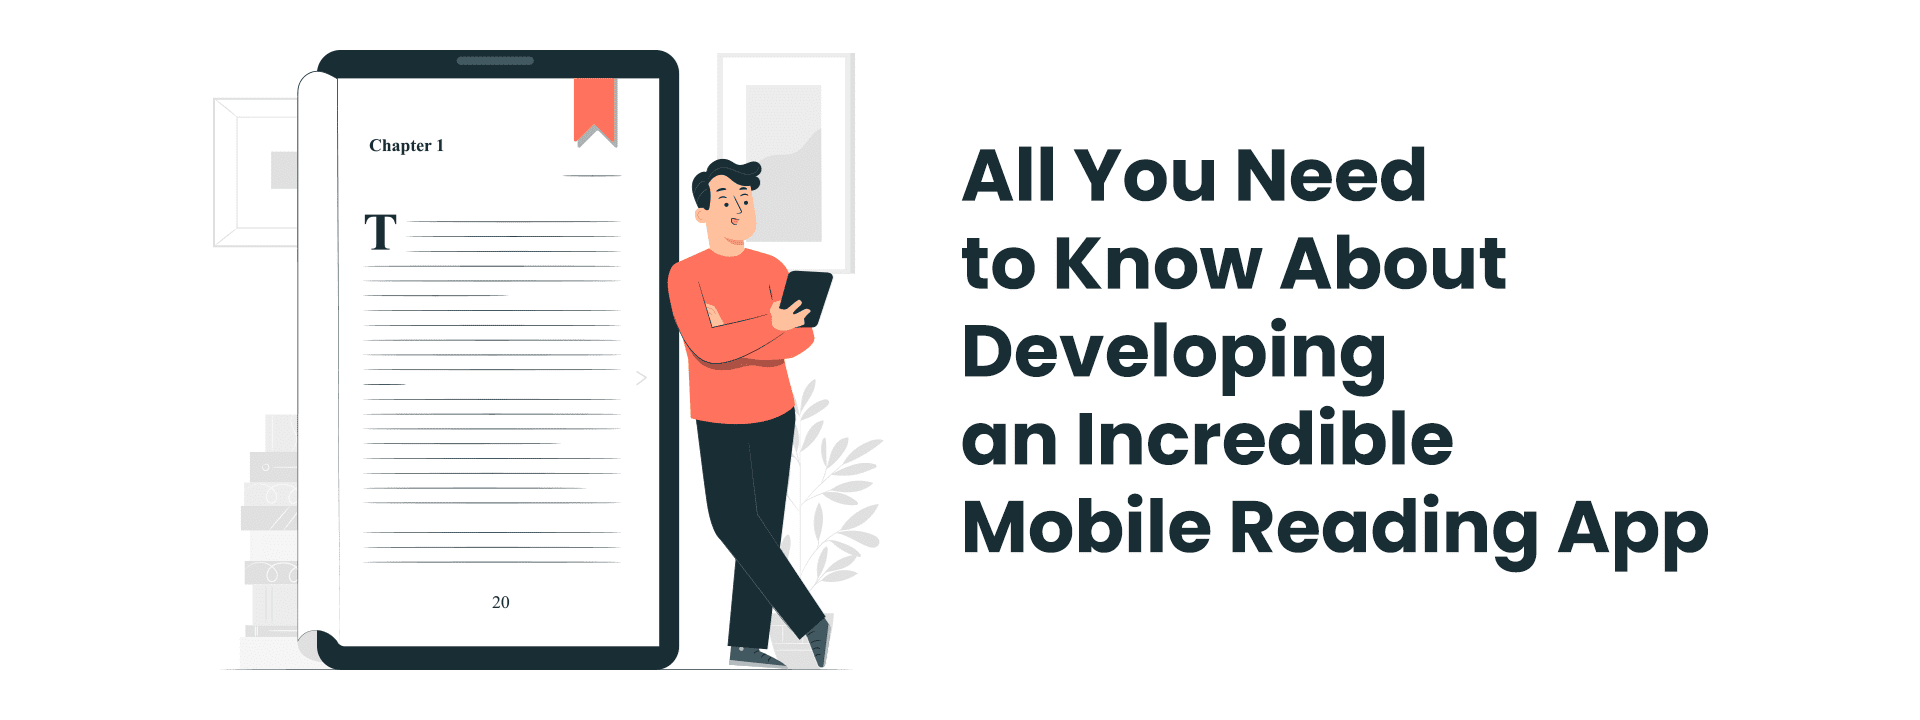 Developing an Incredible Mobile Reading App